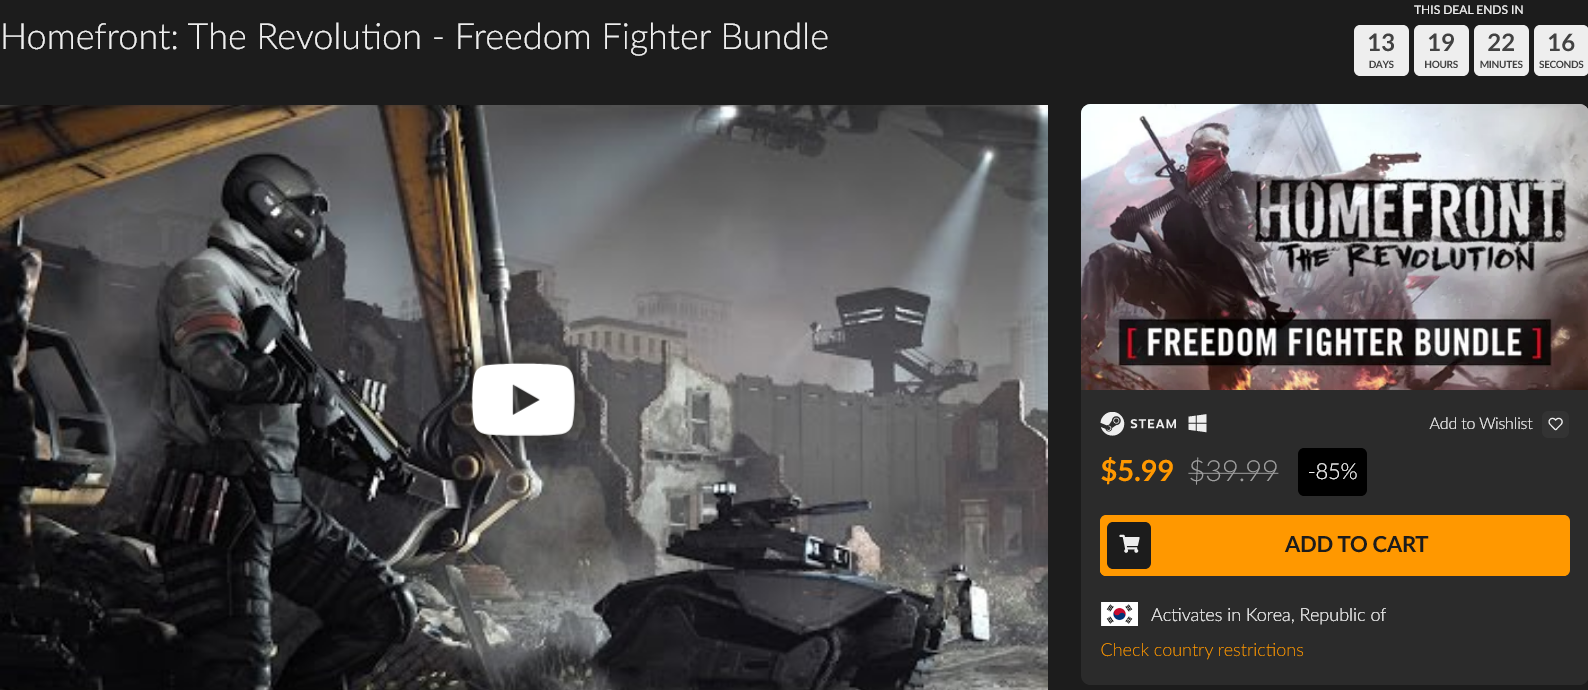 Screenshot_2020-09-12 Homefront The Revolution - Freedom Fighter Bundle PC Steam Game Fanatical.png